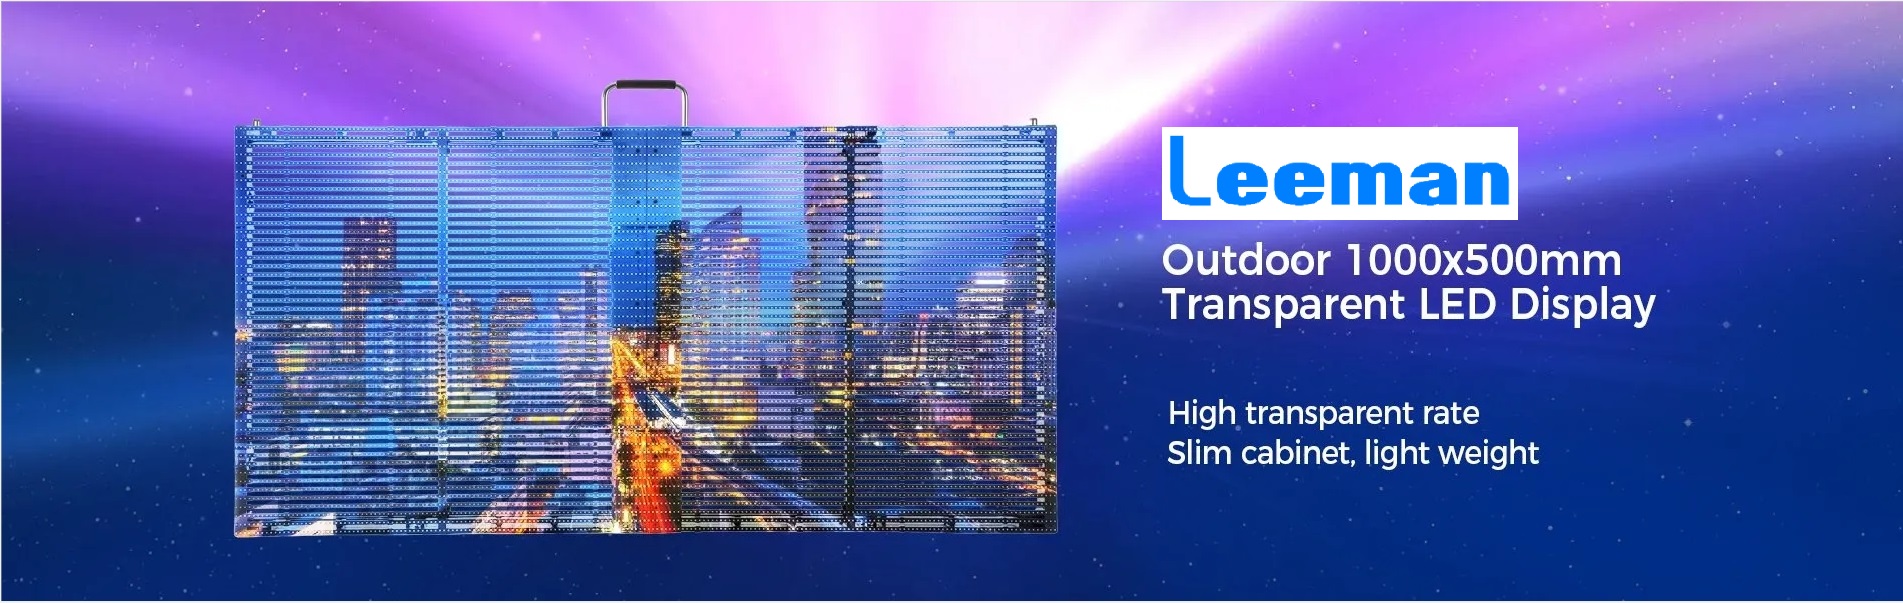 Outdoor Transparent LED Screen 1000×500 Fixed Installation